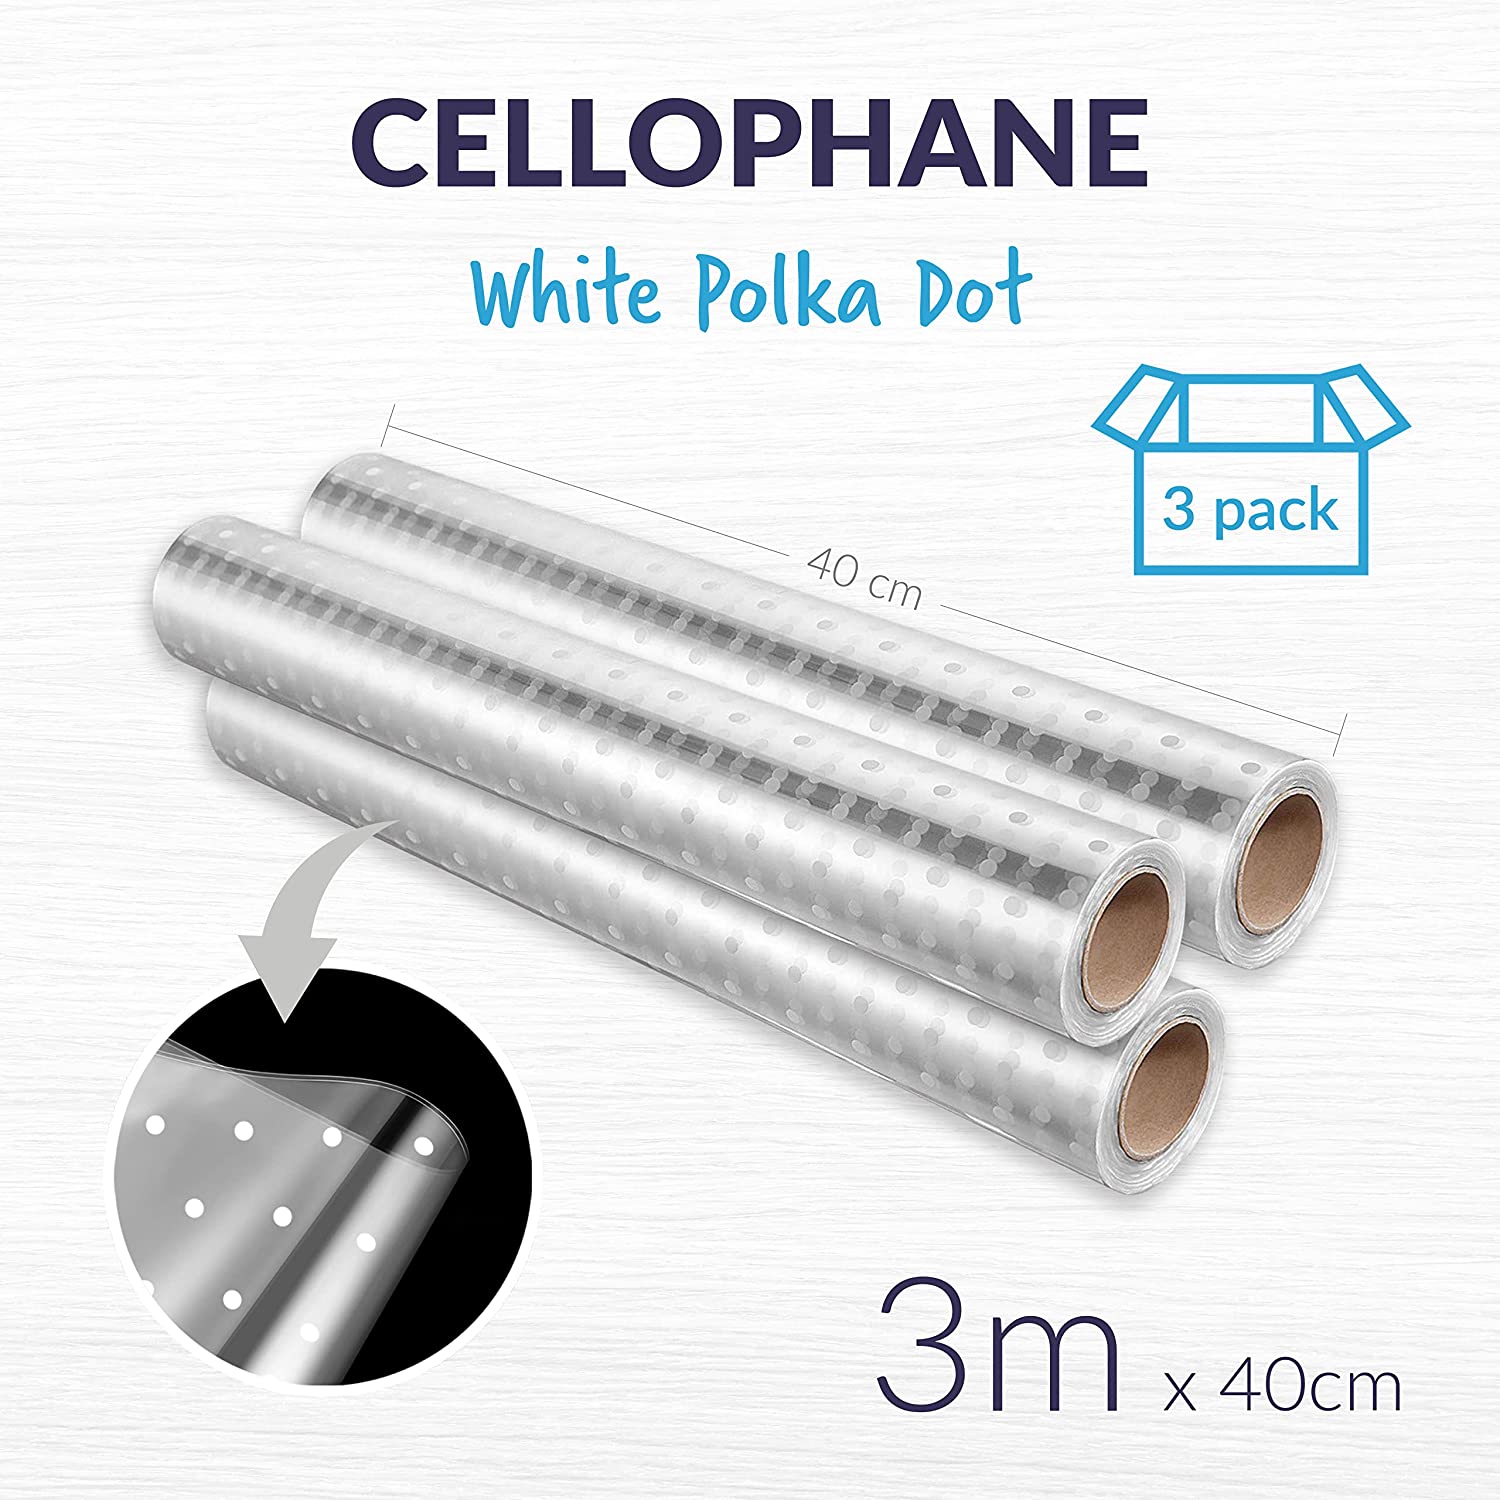 Cellophane White Dot Product Feature